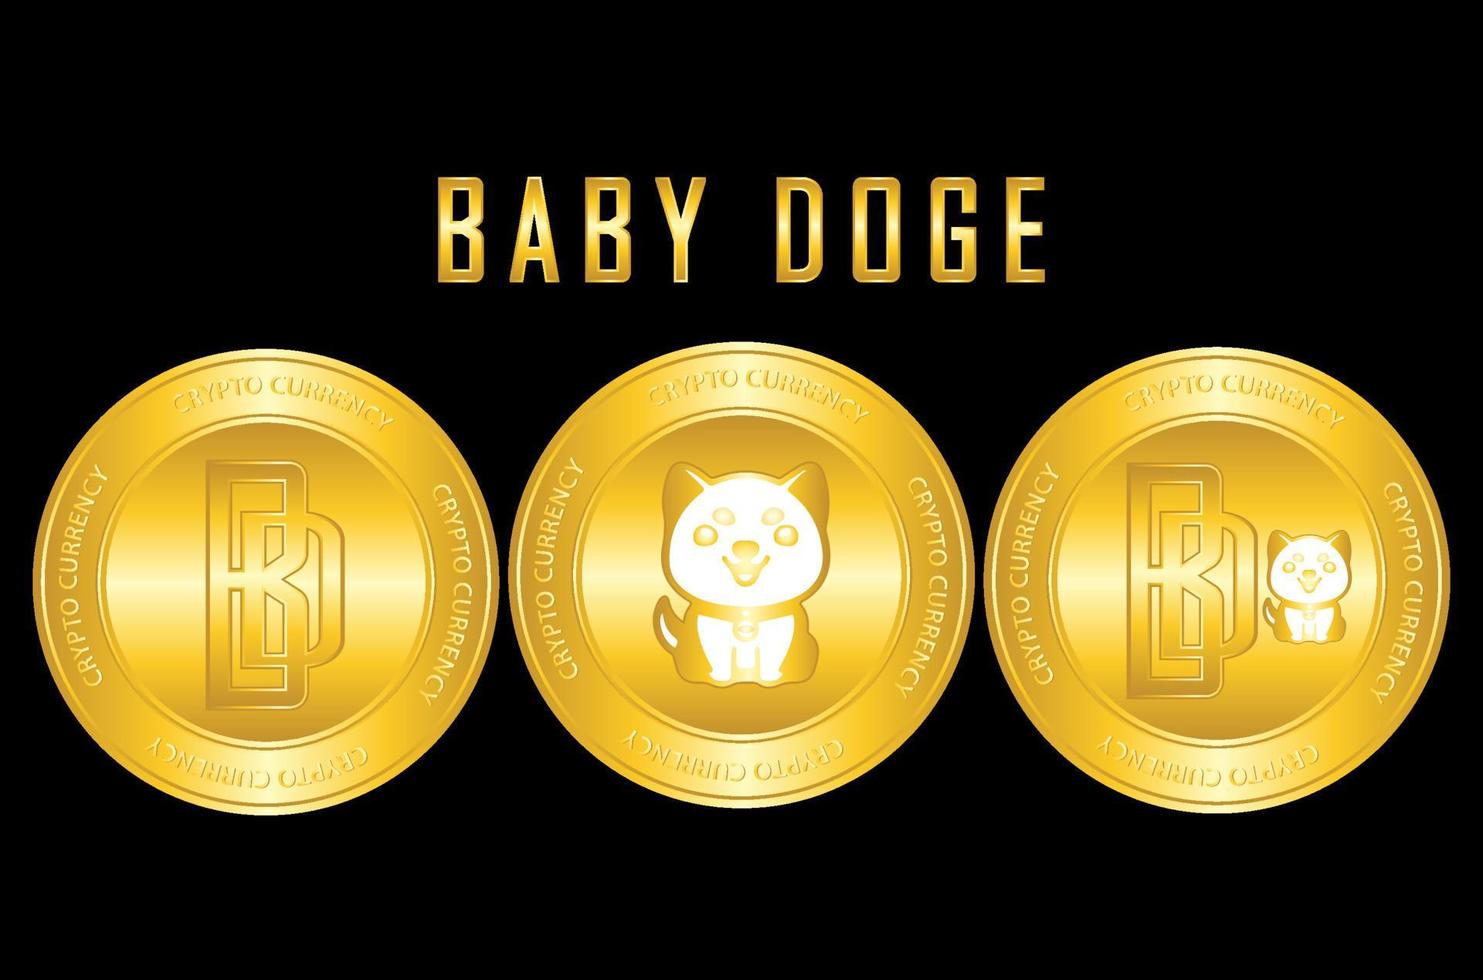 Baby doge crypto currency icon set logo with text and mascot vector